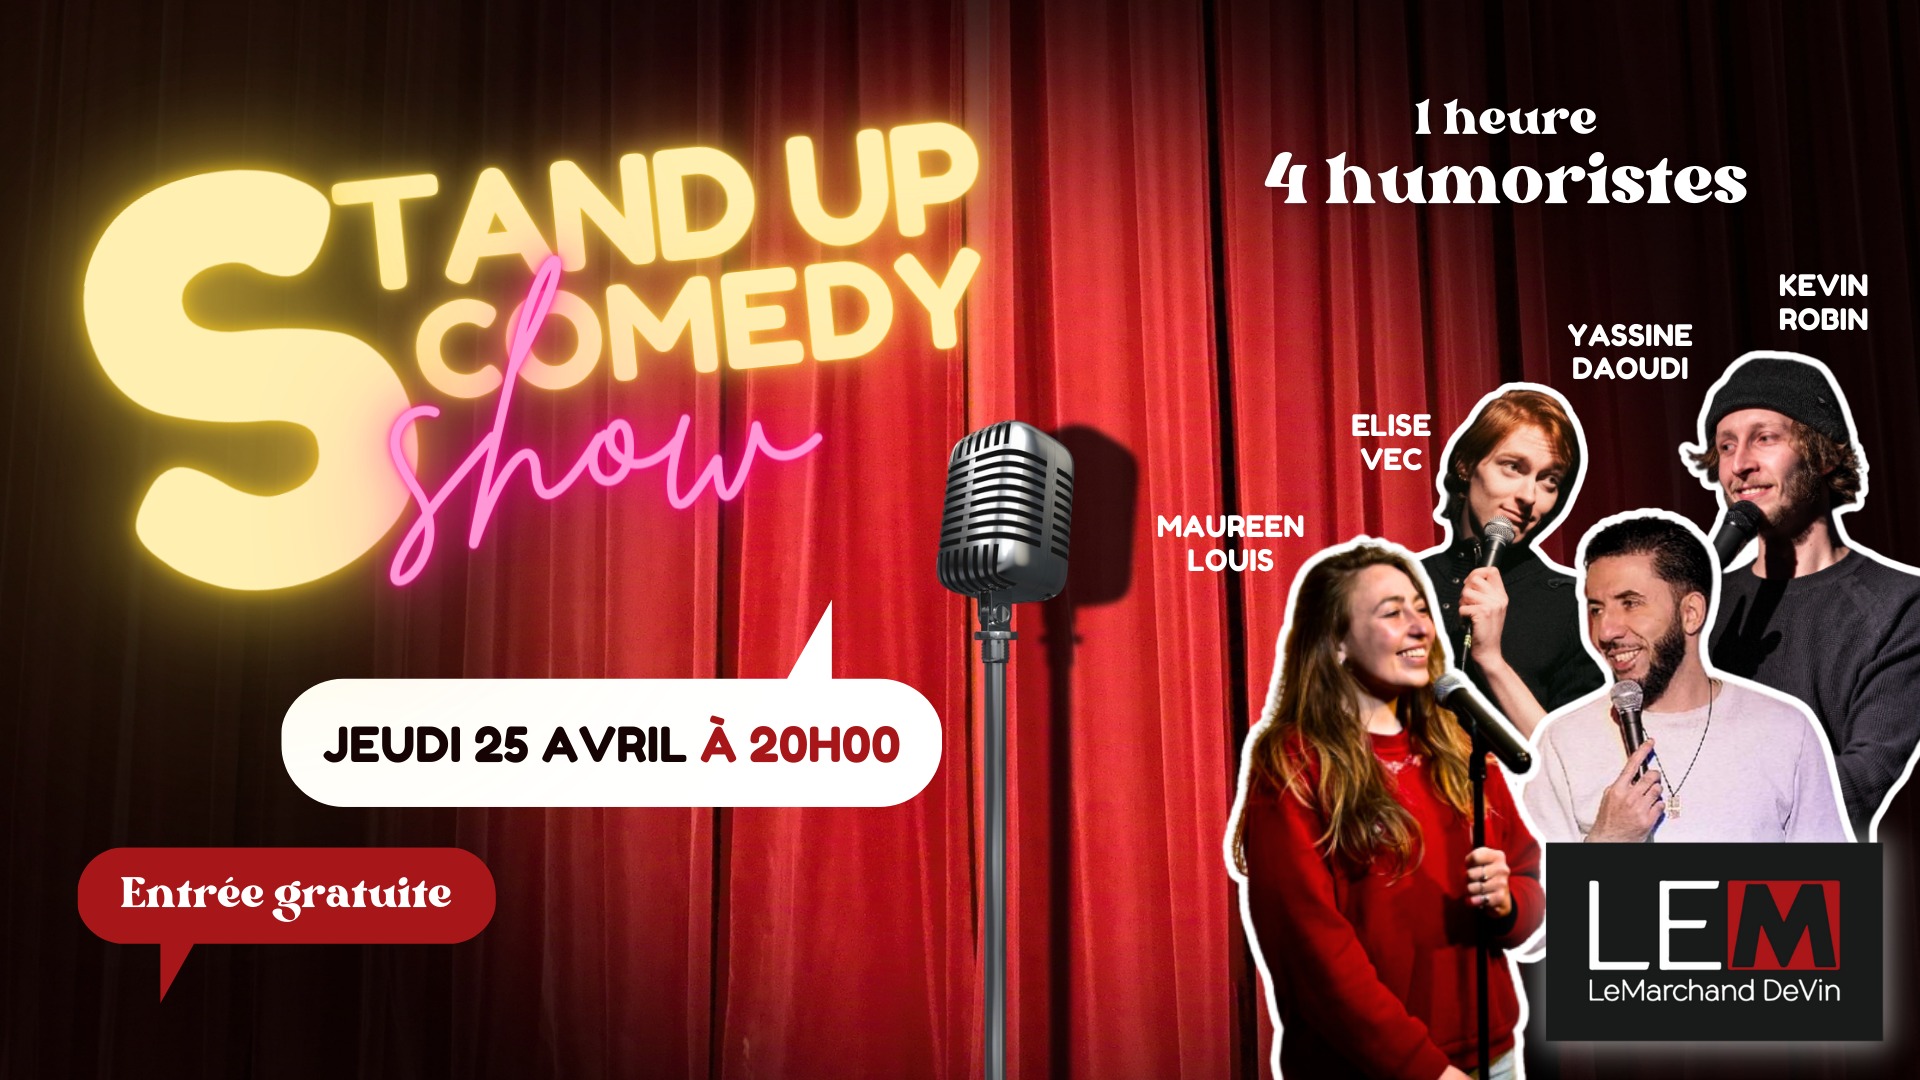 stand up comedy show